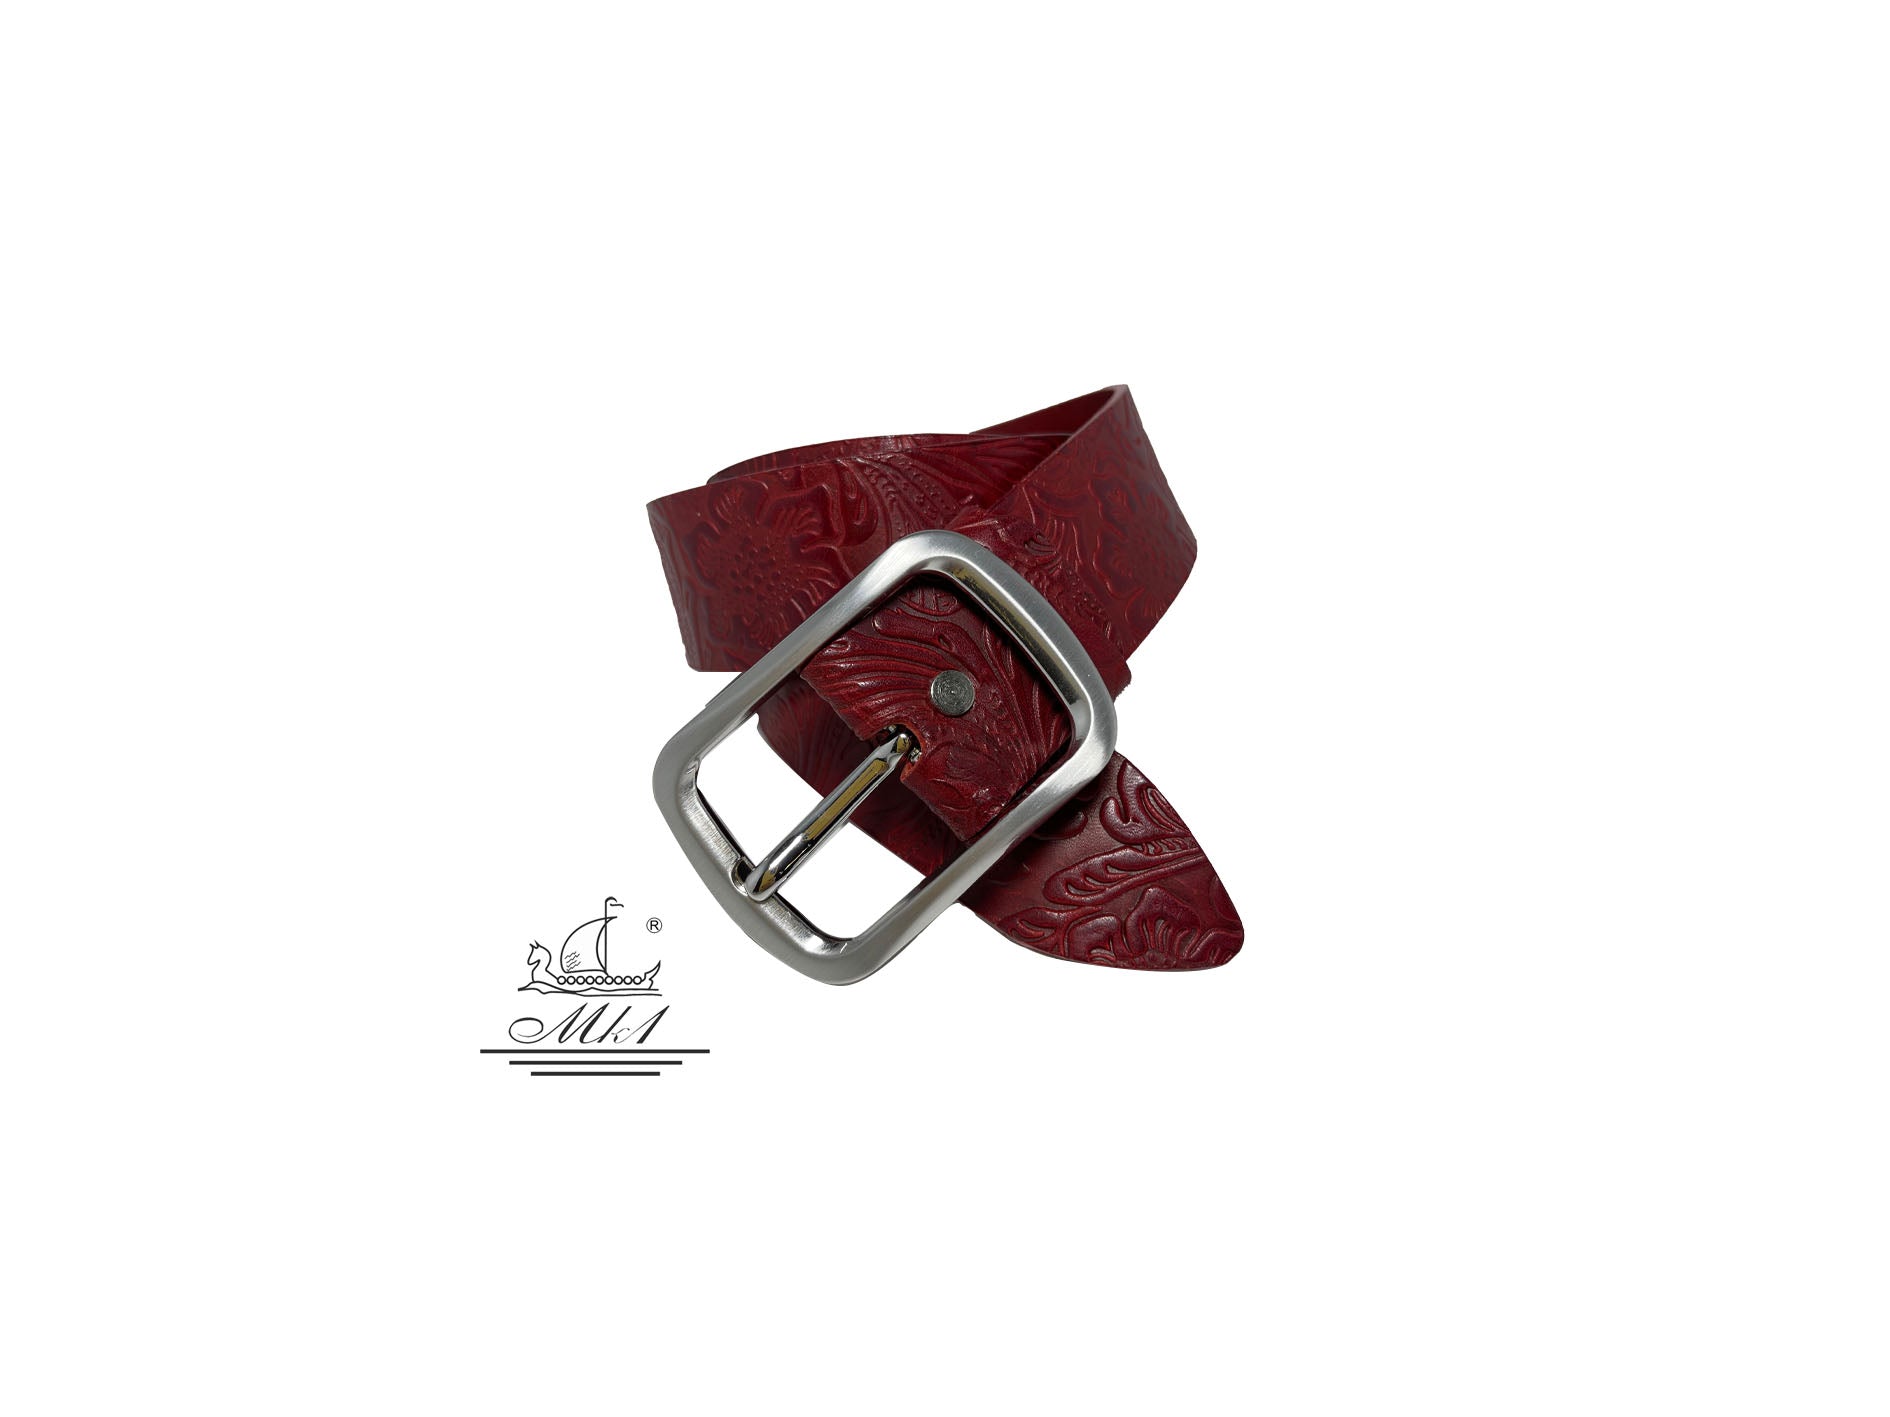 Women's 4cm wide belt handcrafted from red leather with flower design. 100973/40KK/LL